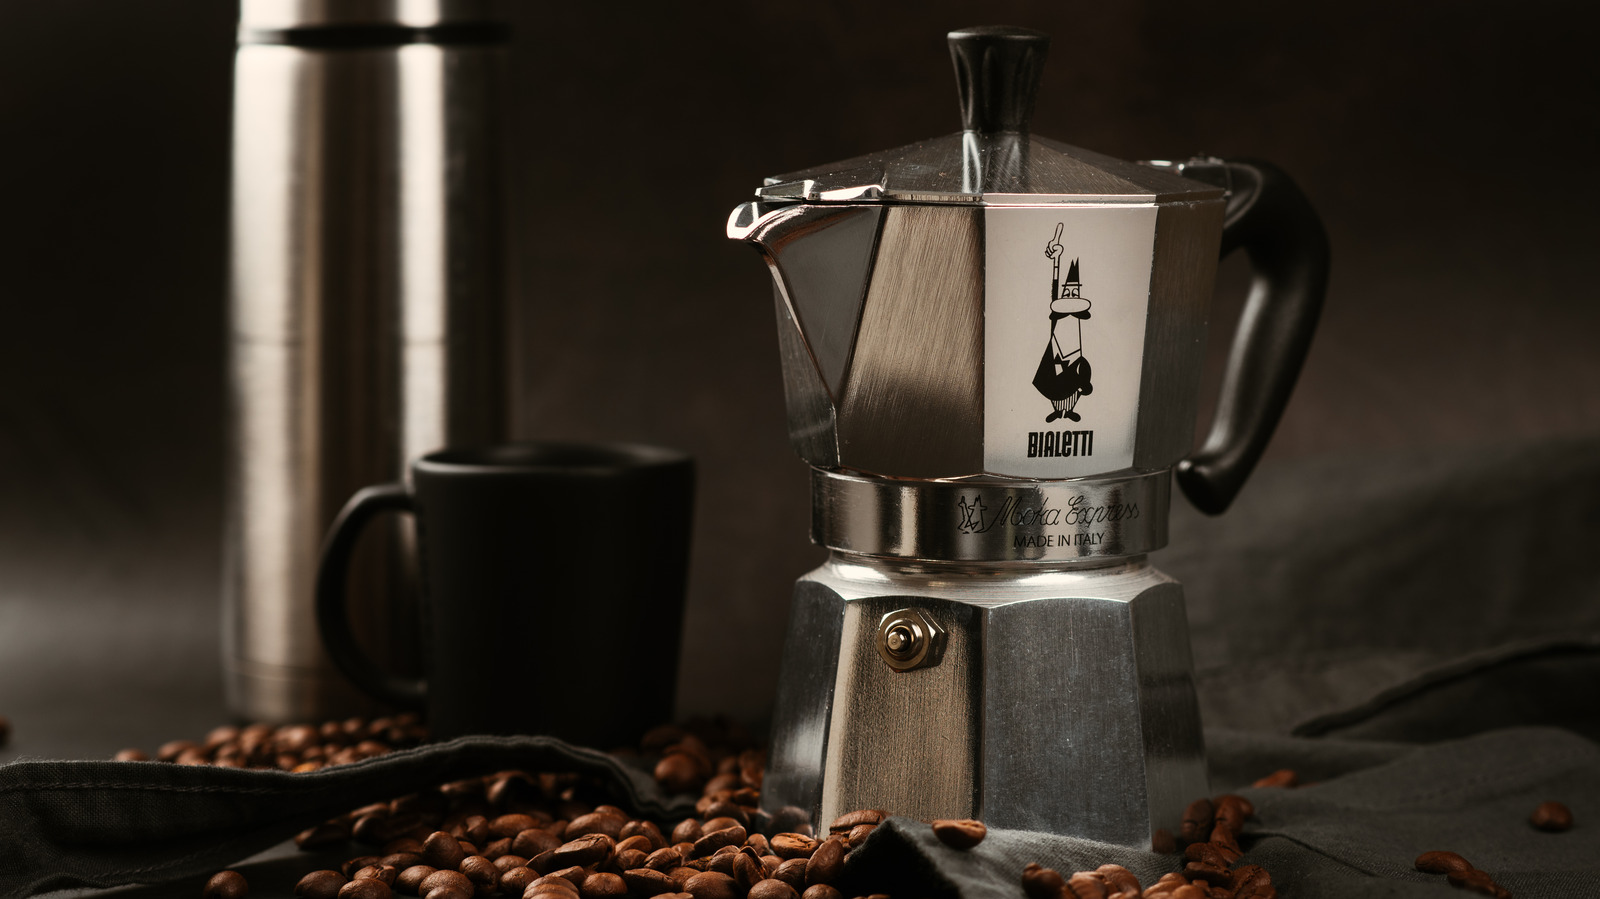 https://www.thedailymeal.com/img/gallery/what-is-a-moka-coffee-pot-and-how-does-it-work/l-intro-1682558303.jpg